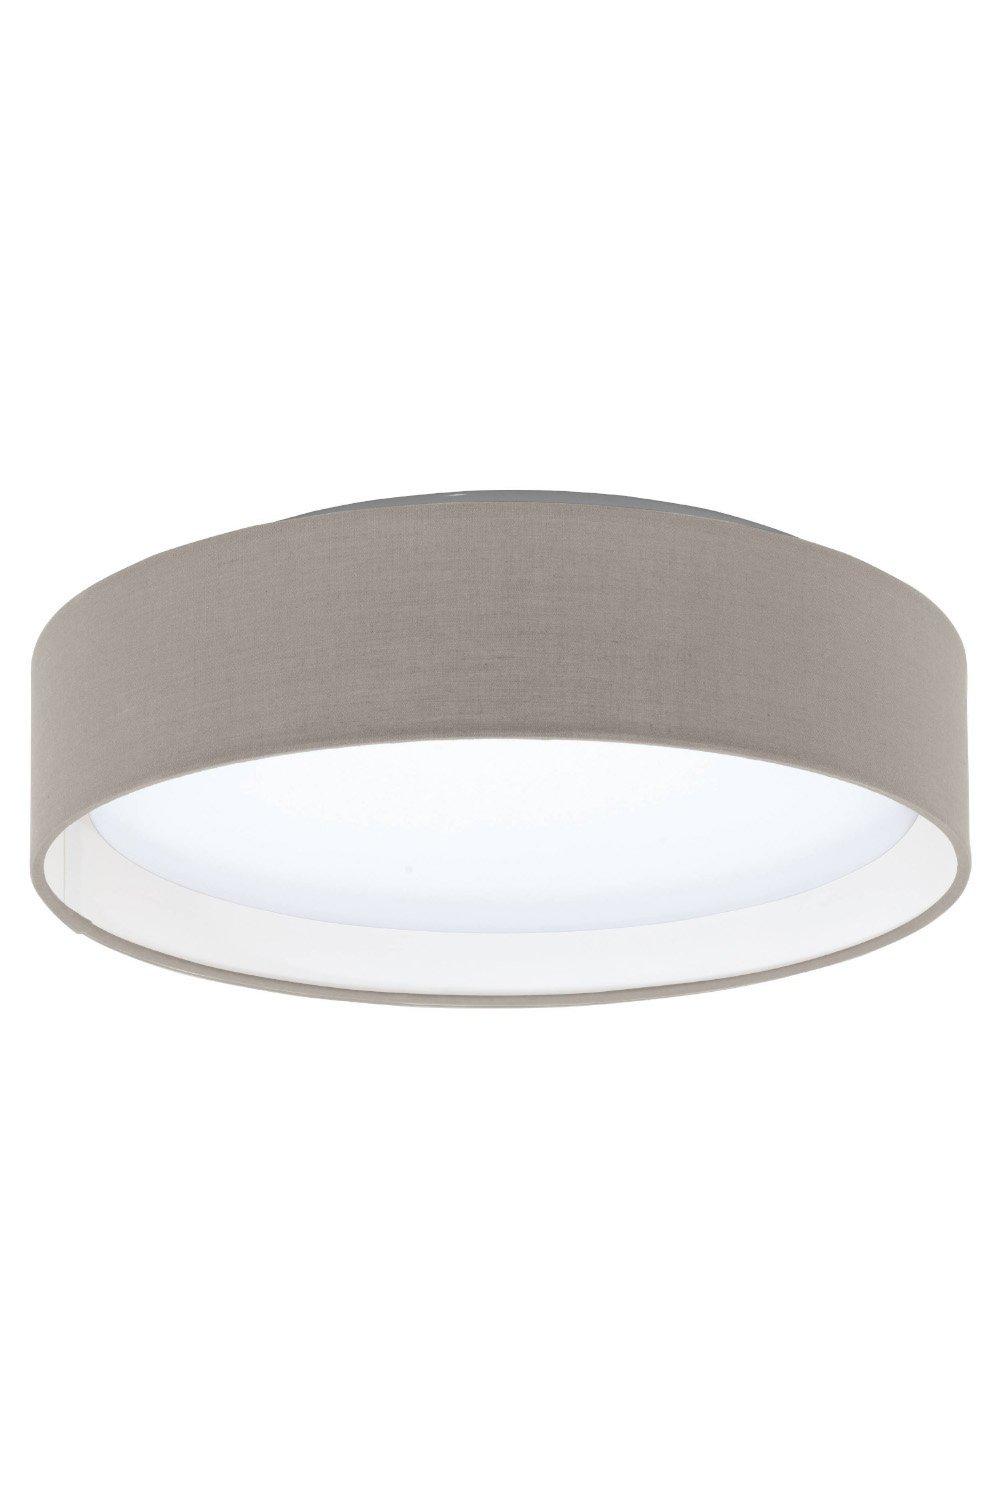 Pasteri Fabric Wired Flush Ceiling Light